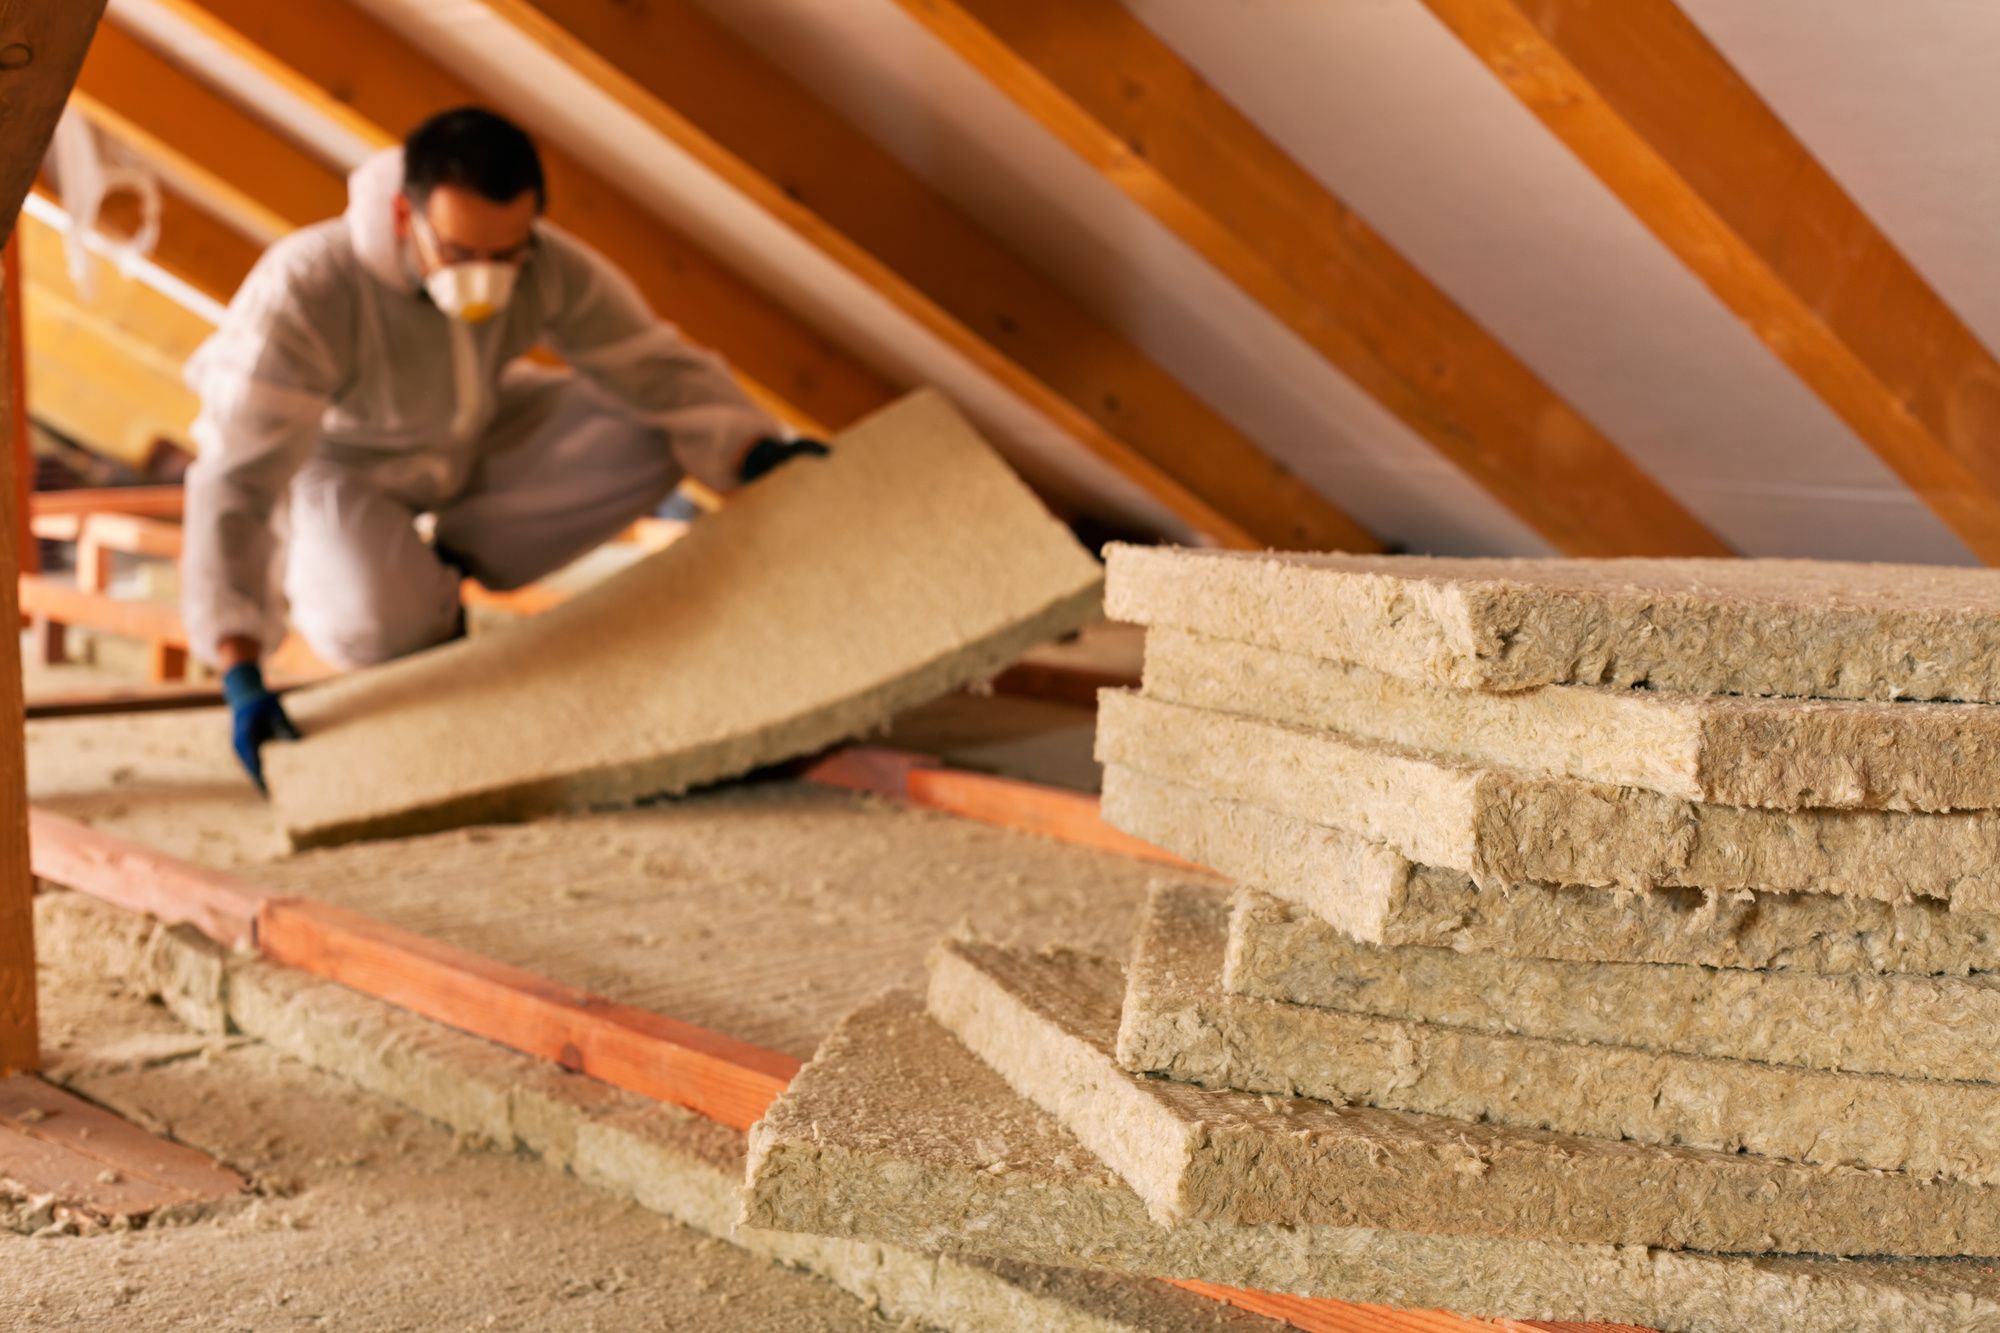 Man laying Insulation in attic